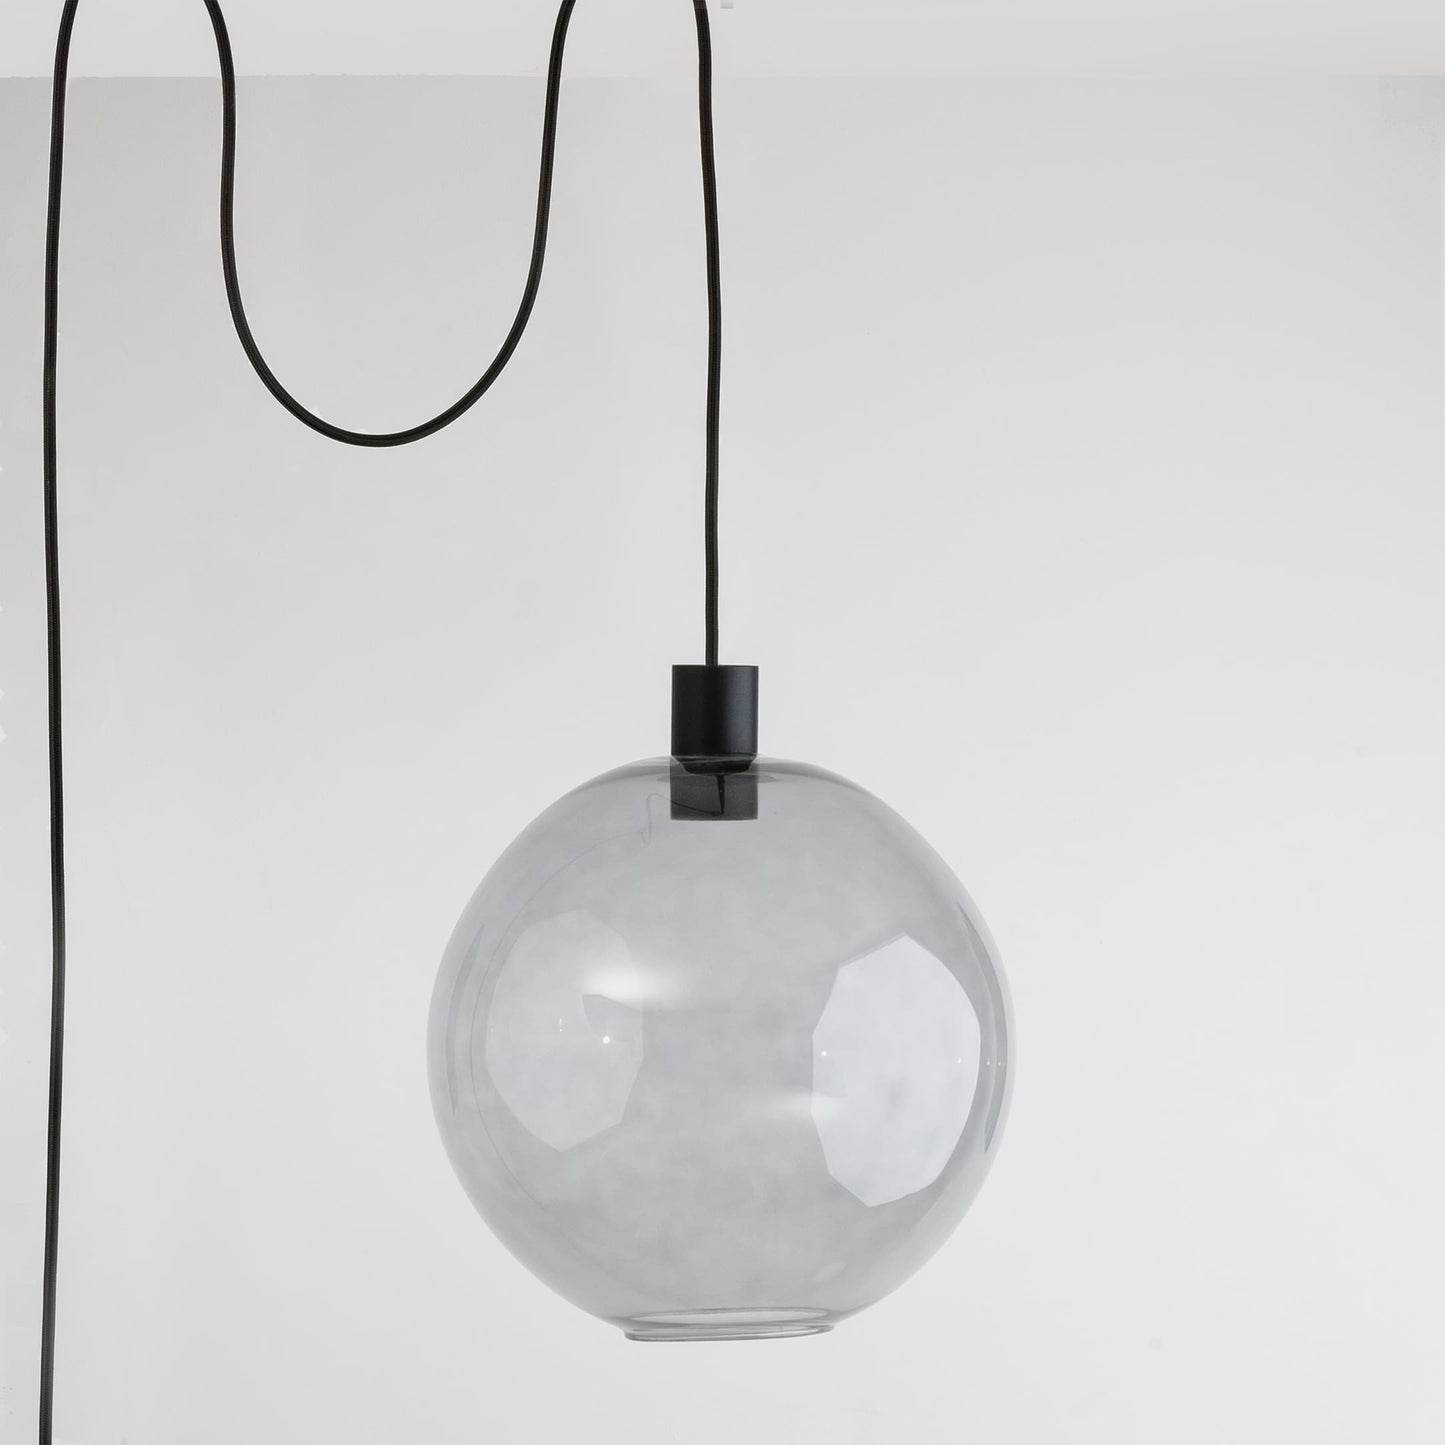 12” All-in-One (AiO) Globe Ceiling Plug-In Pendant